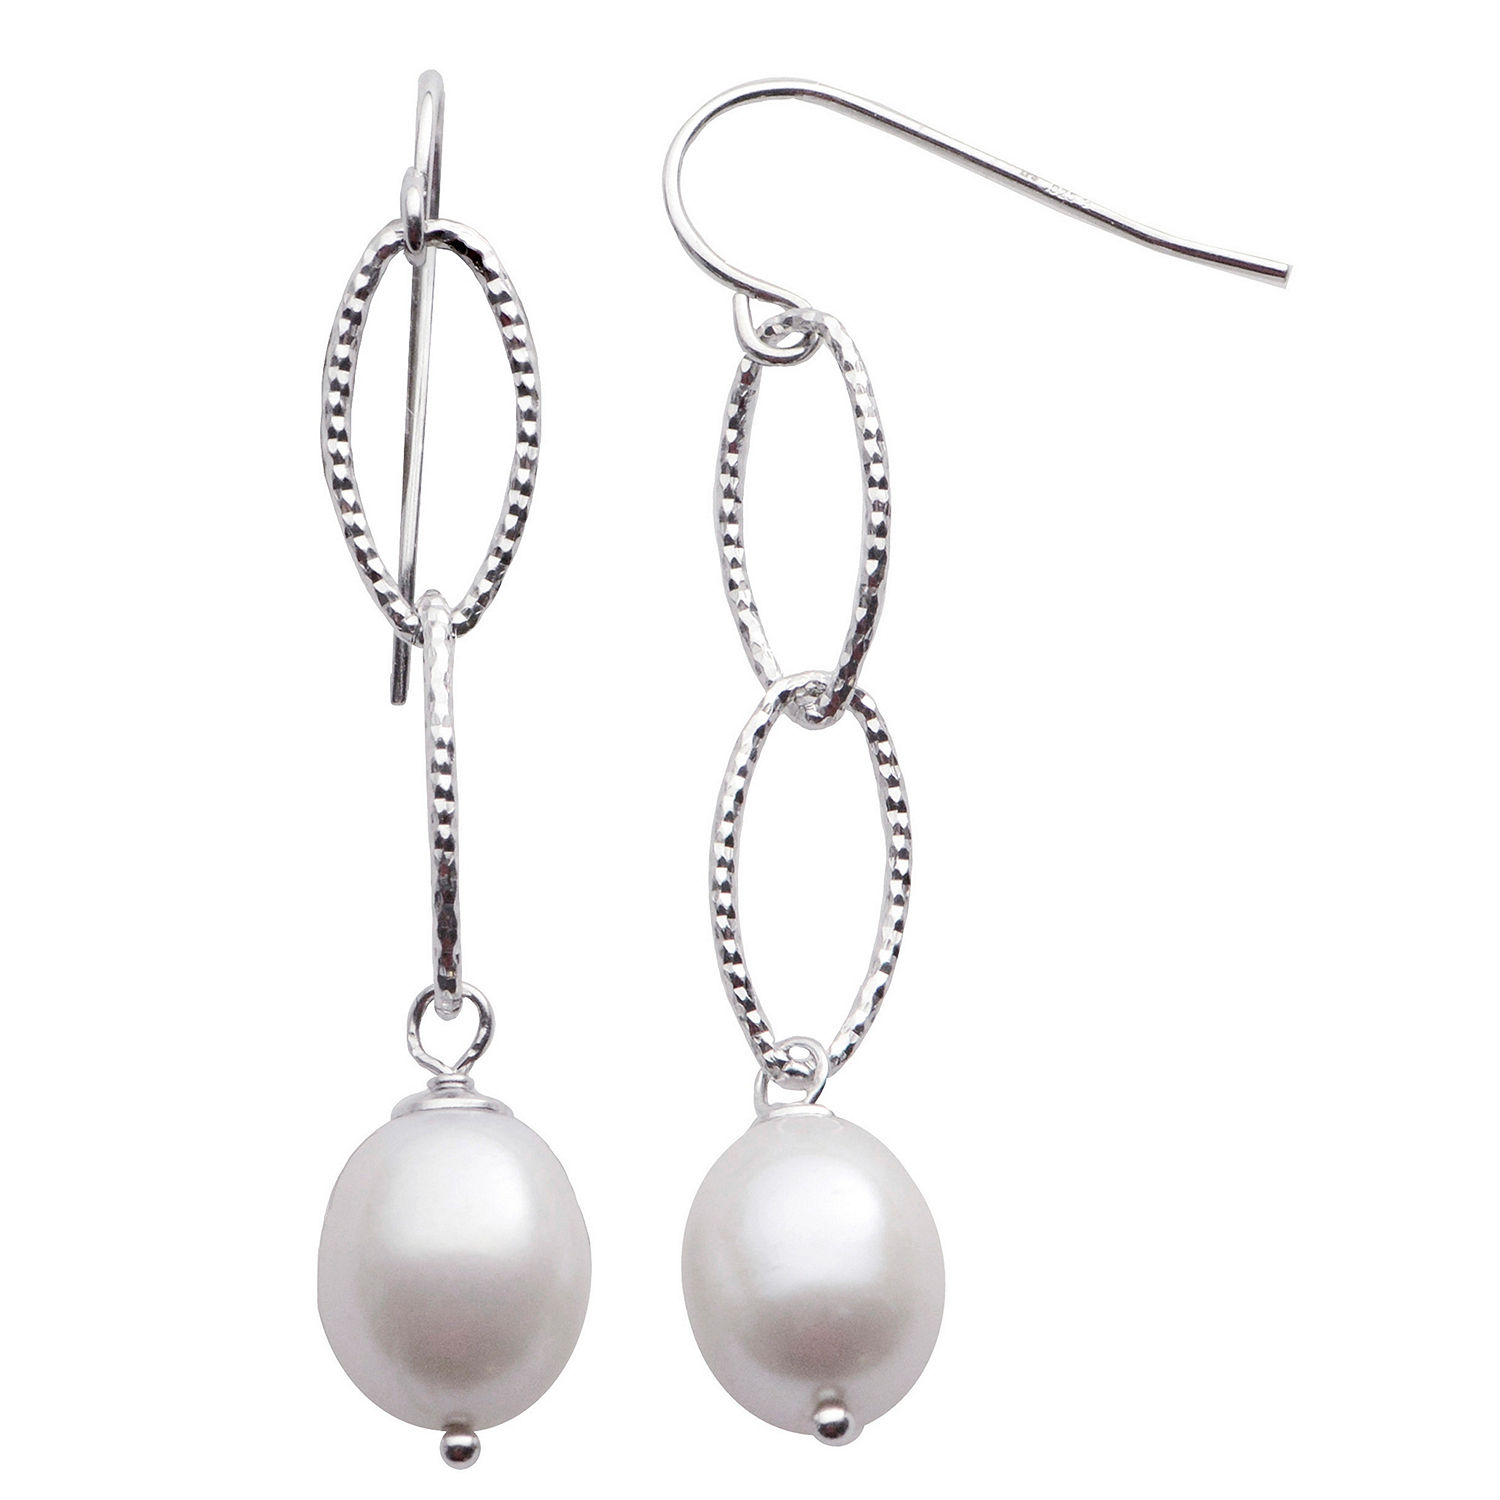 8.5-9Mm Cultured Freshwater Pearl Sterling Silver Earrings - JCPenney